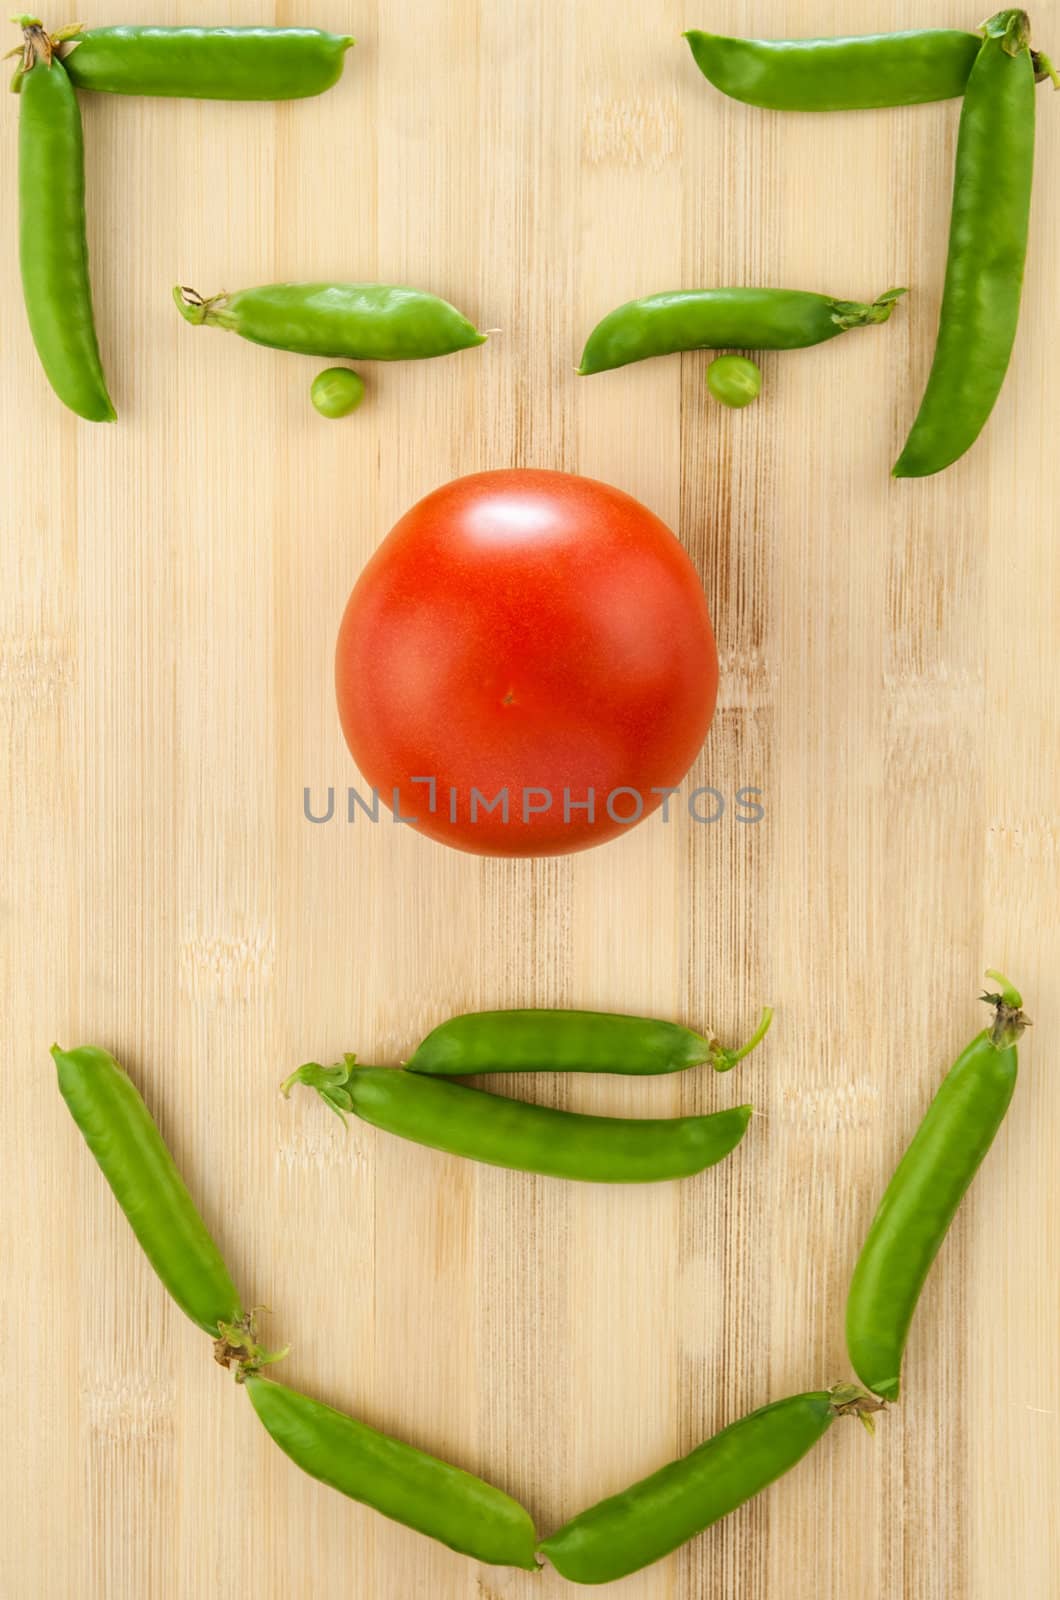 tomato and green peas laid out on a table in the form of face